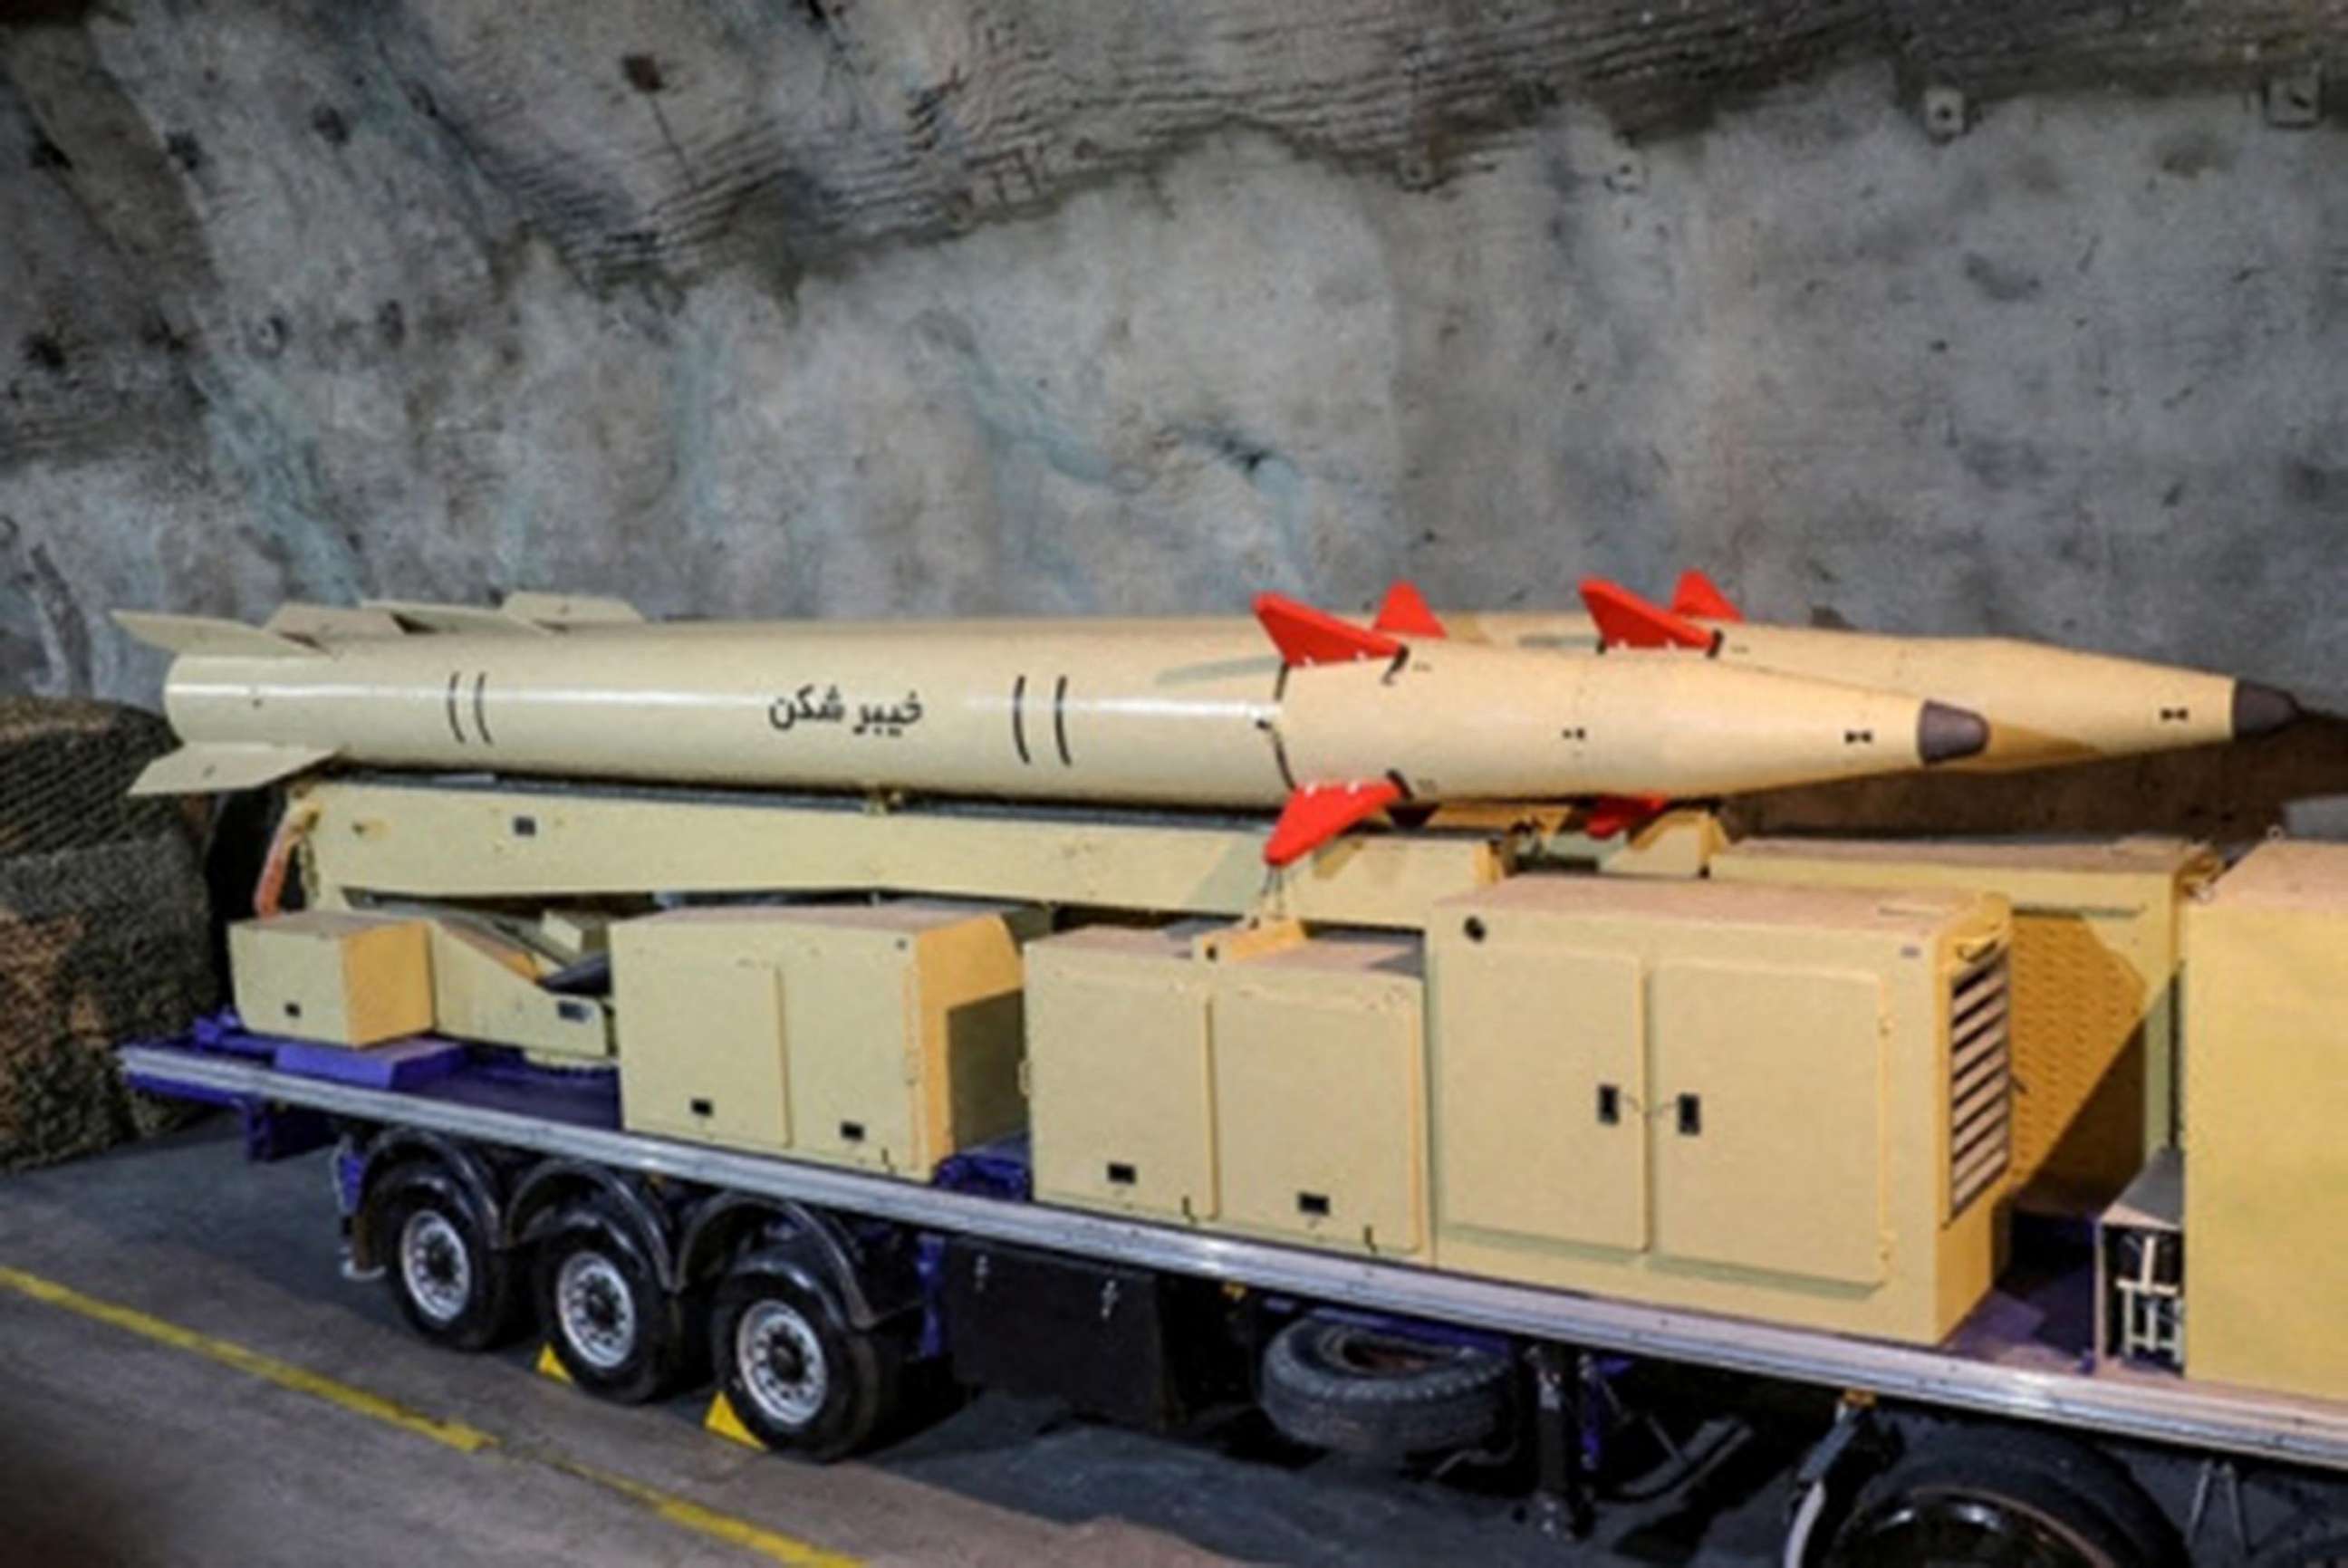 PHOTO: New Iranian "Kheibarshekan" missiles are unveiled in an undisclosed location in Iran, in this picture obtained on Feb. 9, 2022.